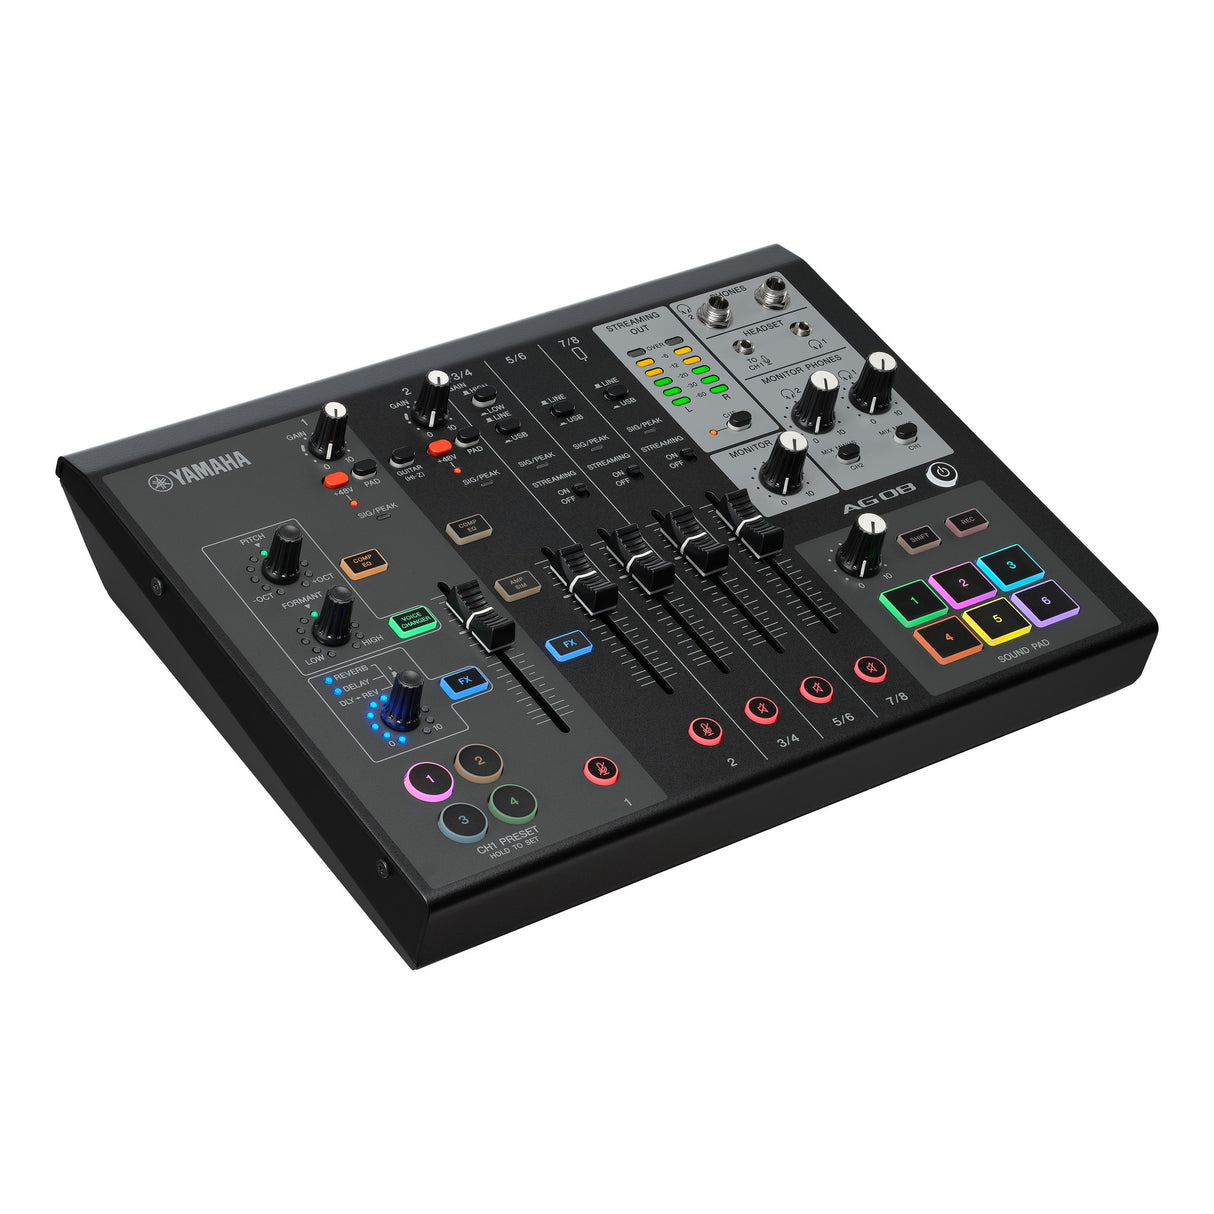 Yamaha AG08 8-Channel All-In-One Live Streaming Mixer, Black